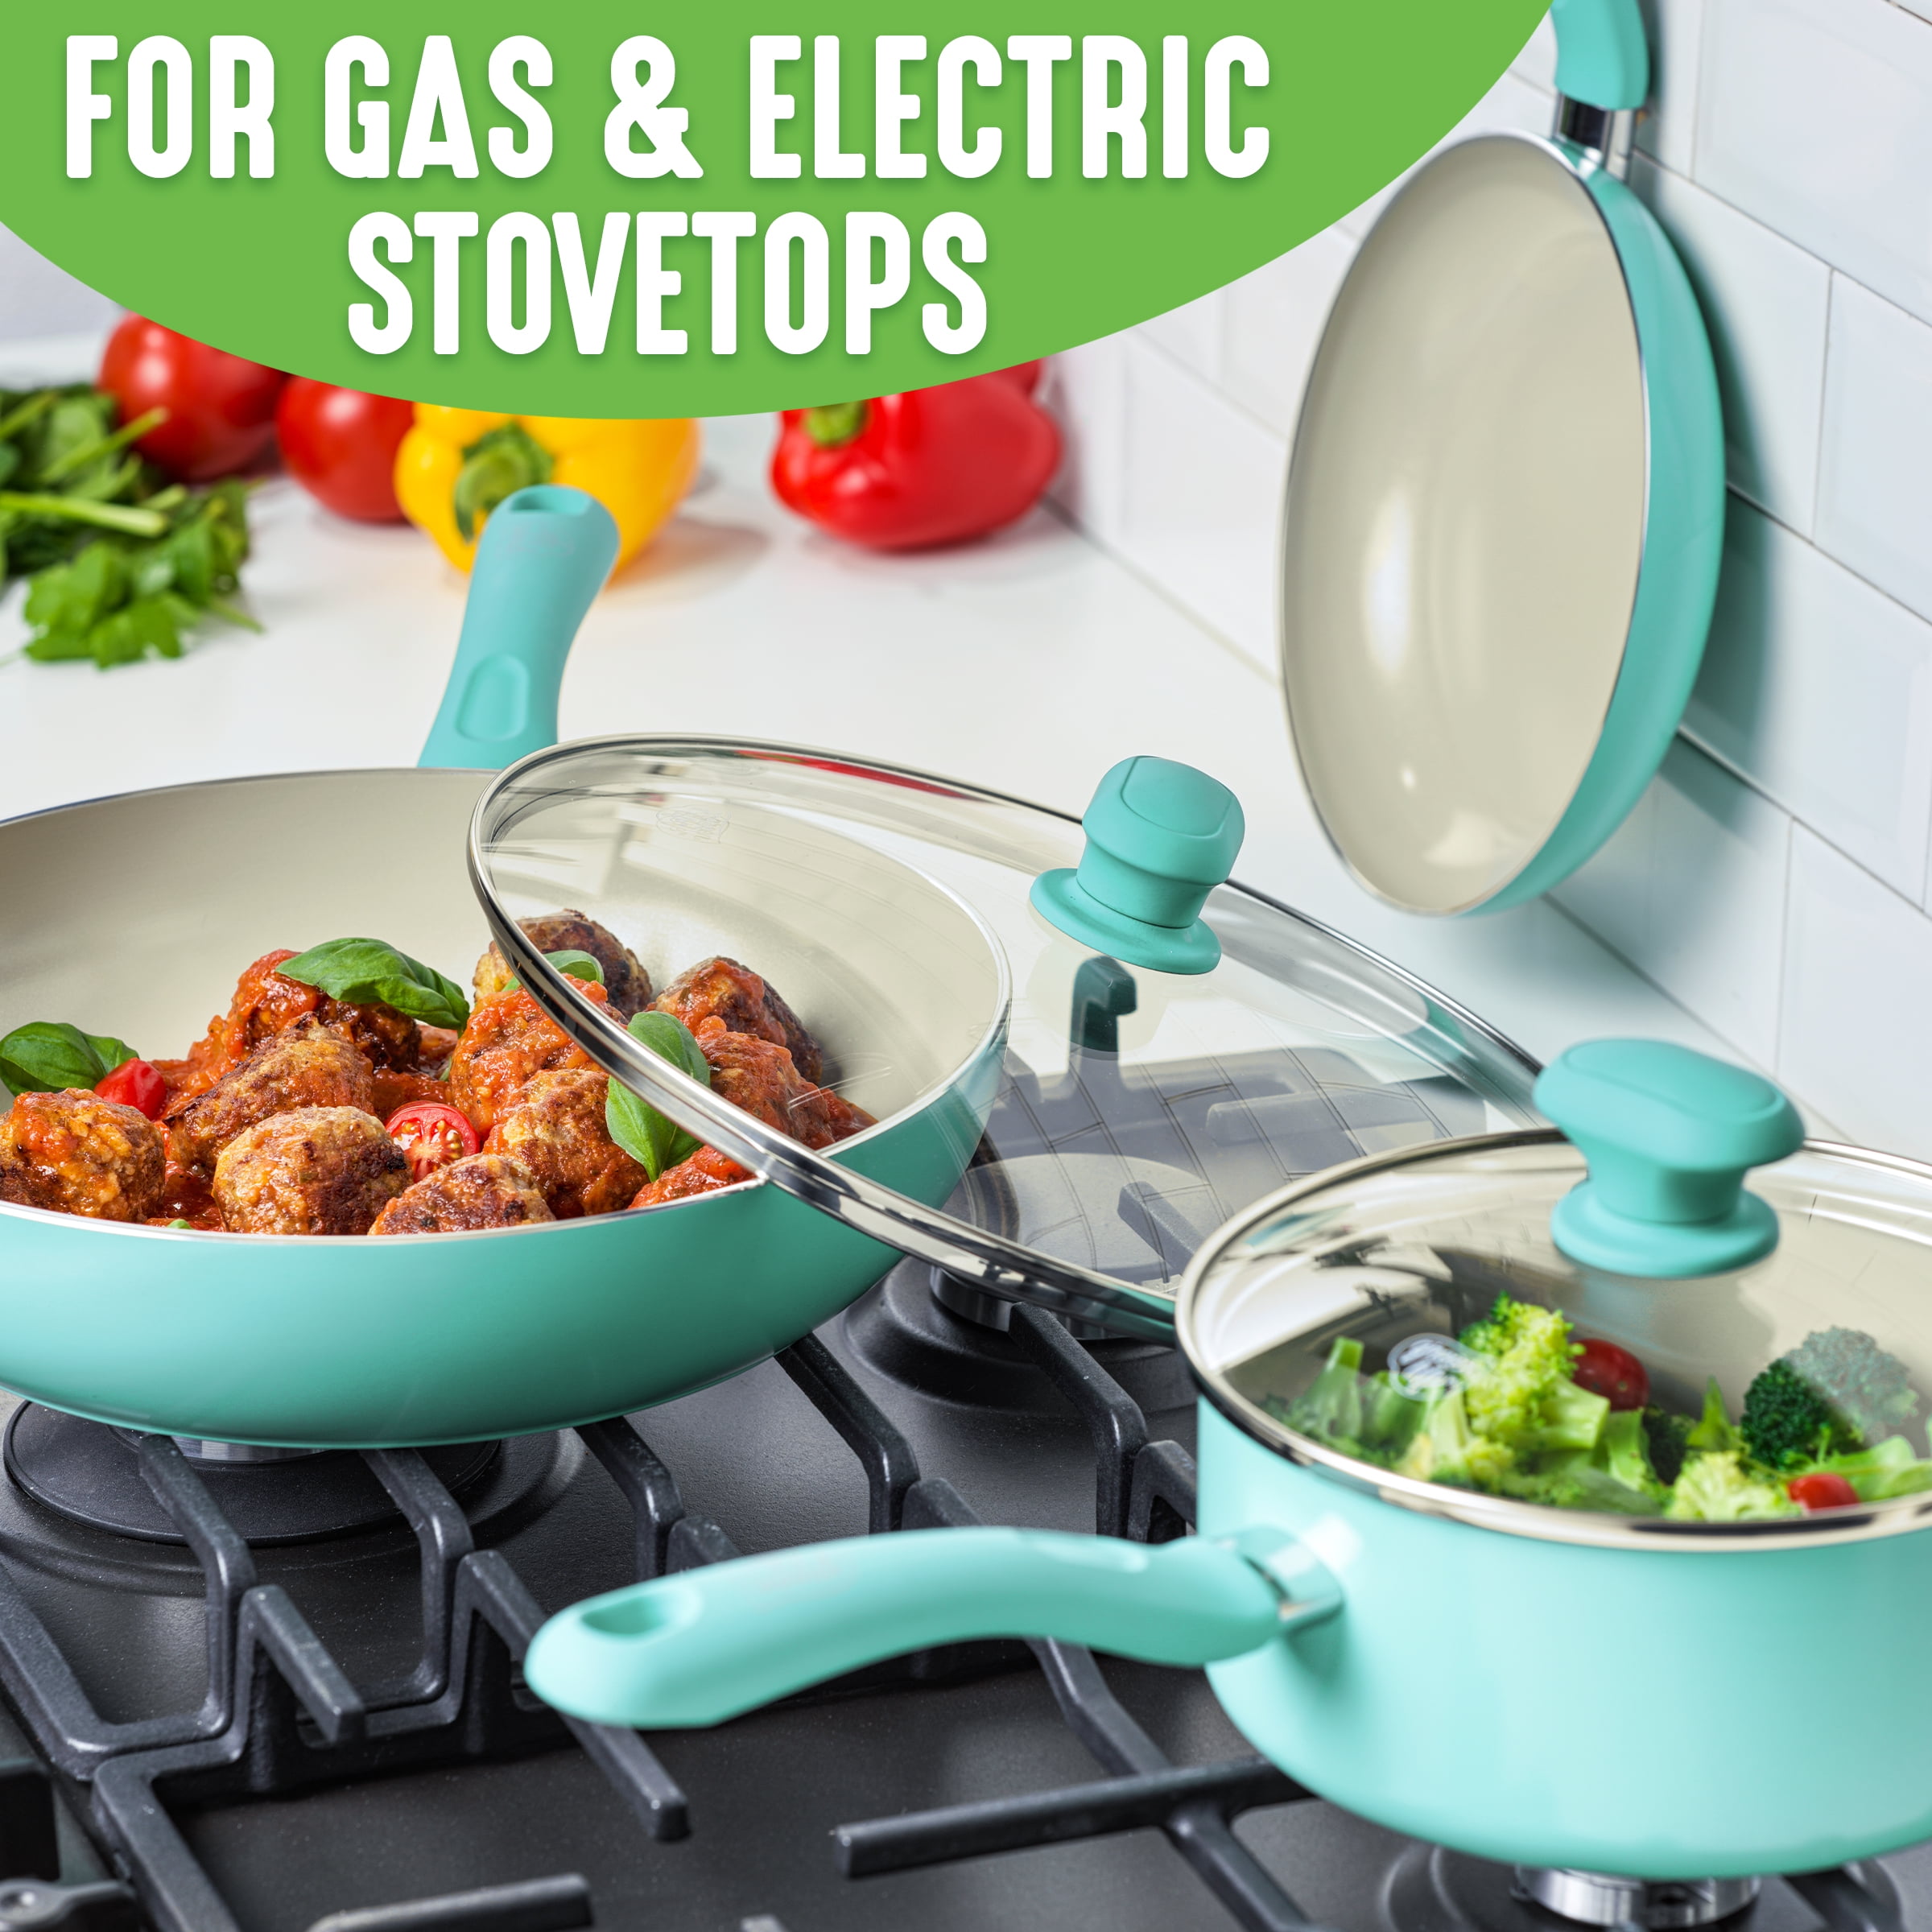 GreenLife CC000884-001 Soft Grip Absolutely Toxin-Free Healthy Ceramic Nonstick Dishwasher/Oven Safe Stay Cool Handle Cookware Set 4-Piece Turquoise